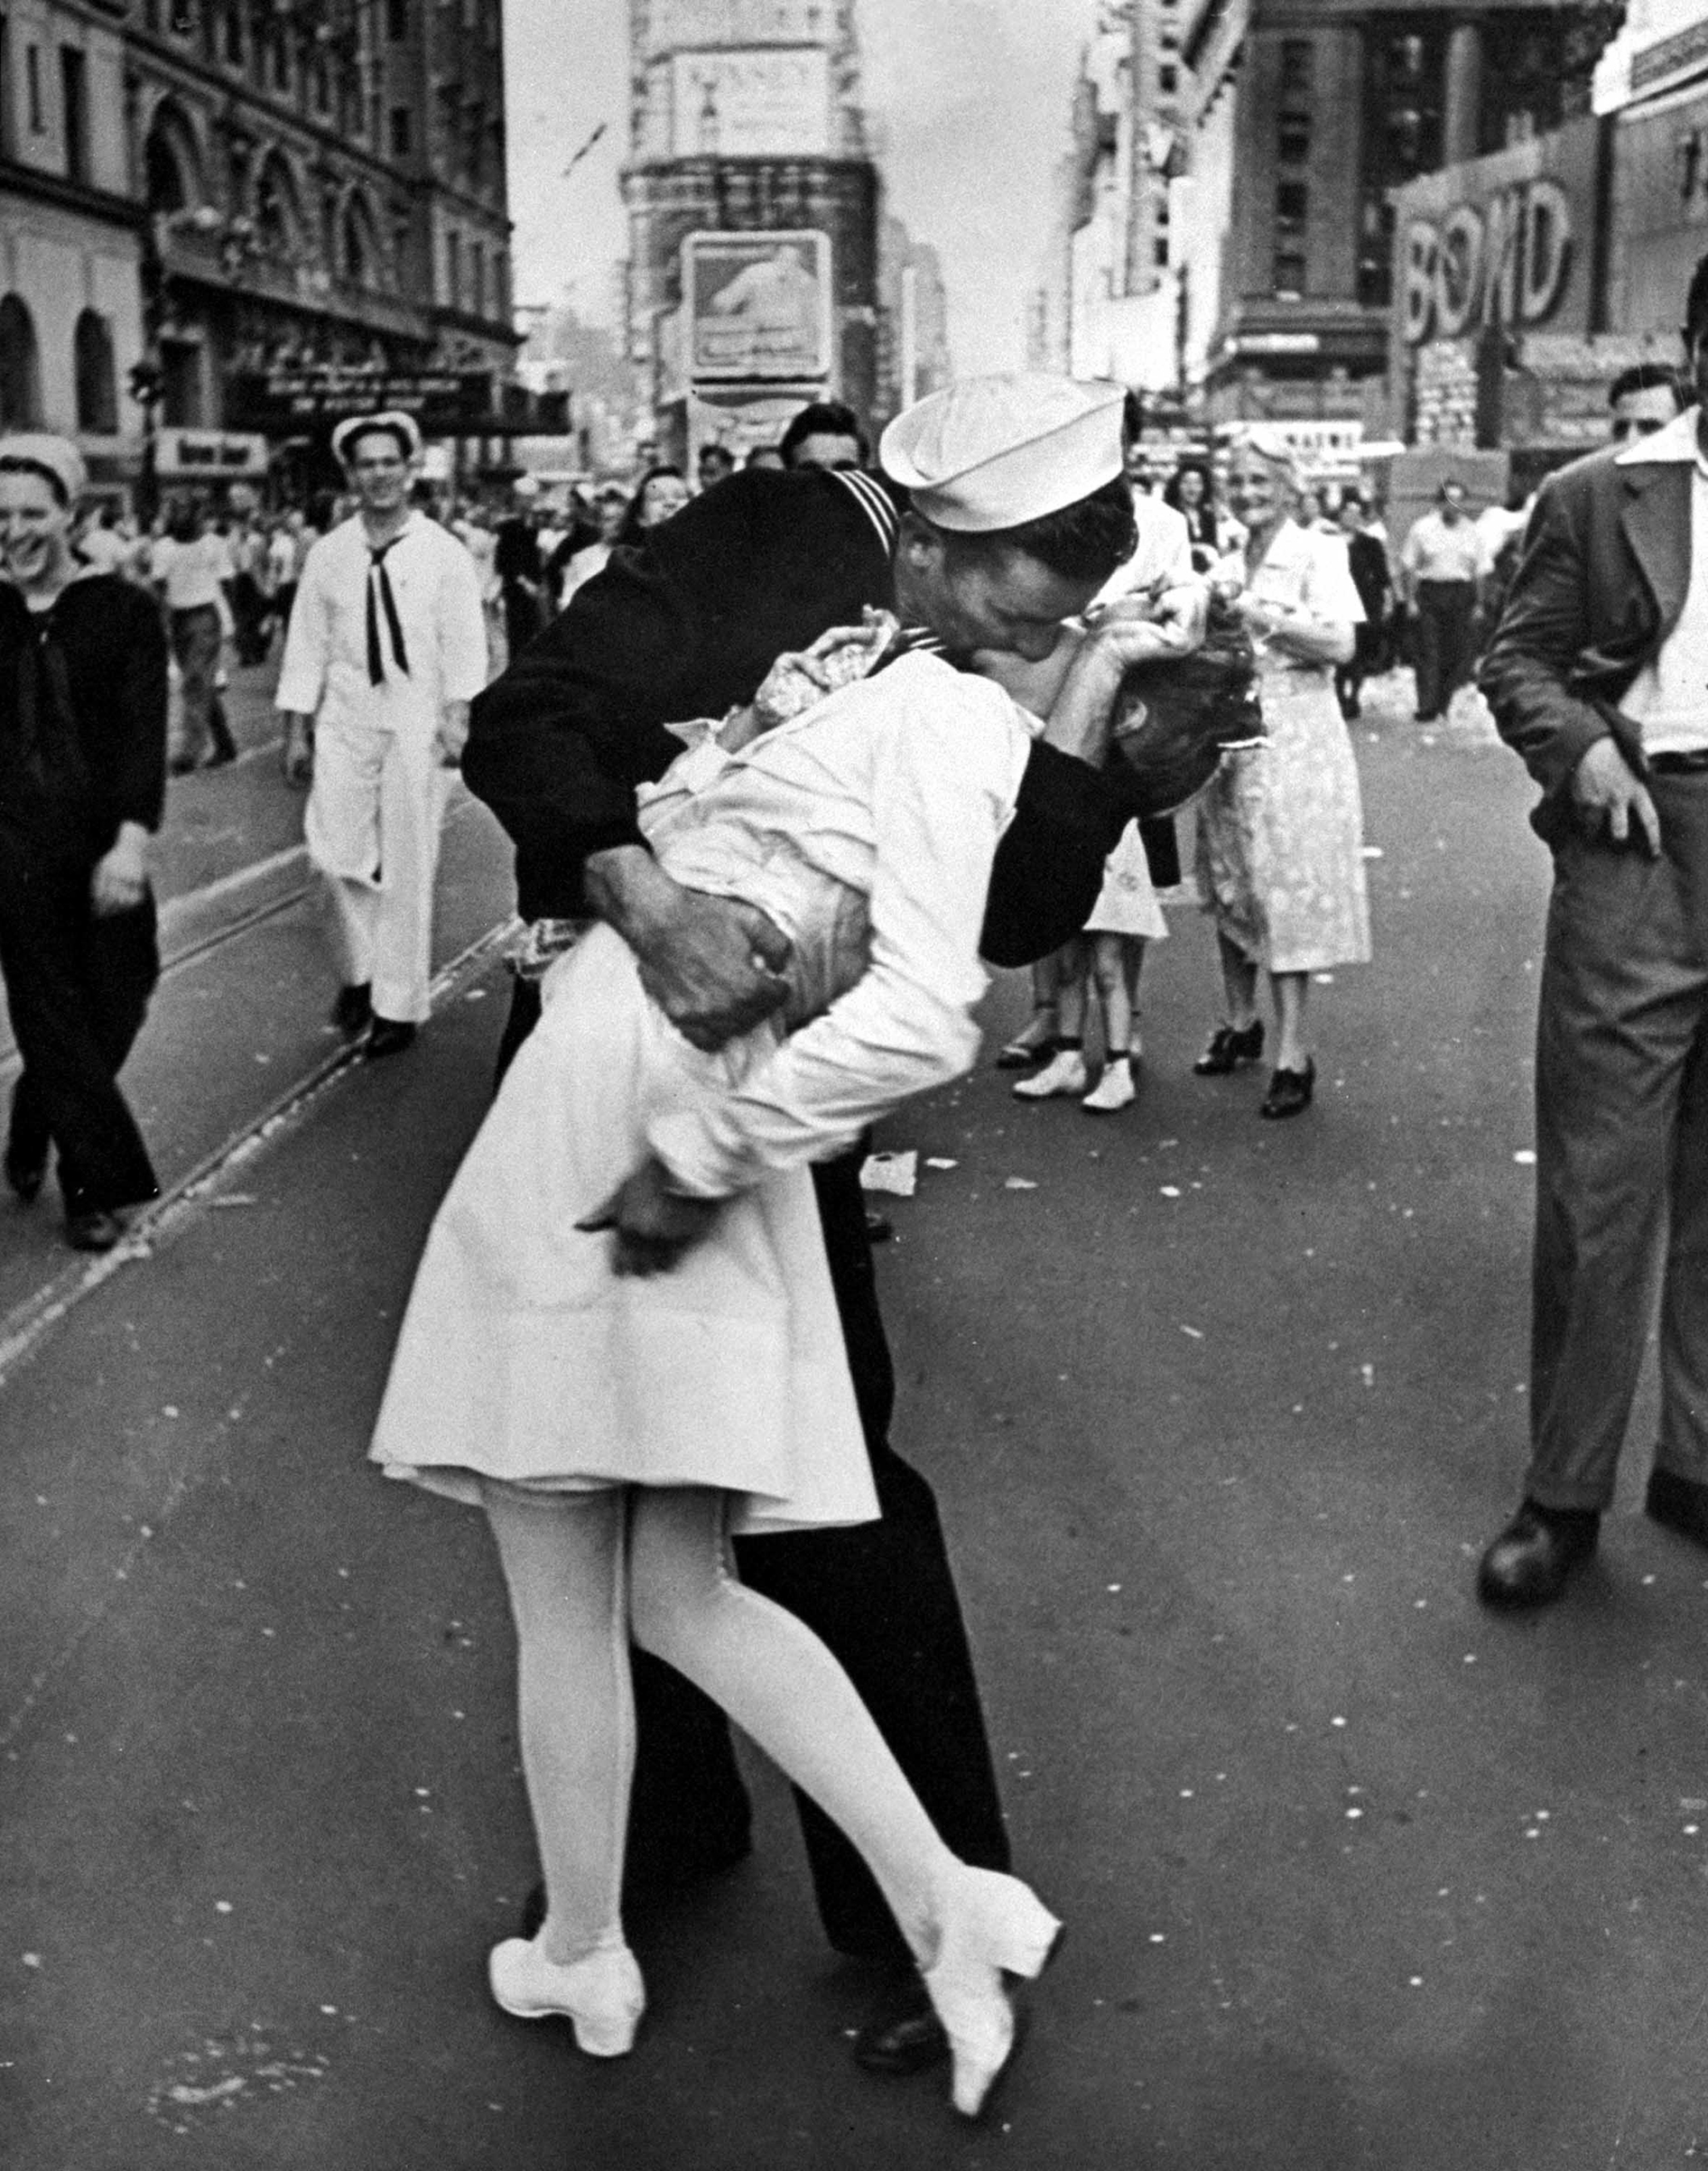 A jubilant American sailor clutching a nurse in a back-bending, passionate kiss as he vents his joy while thousands jam the Times Square area to celebrate the long awaited victory over Japan. 1945.